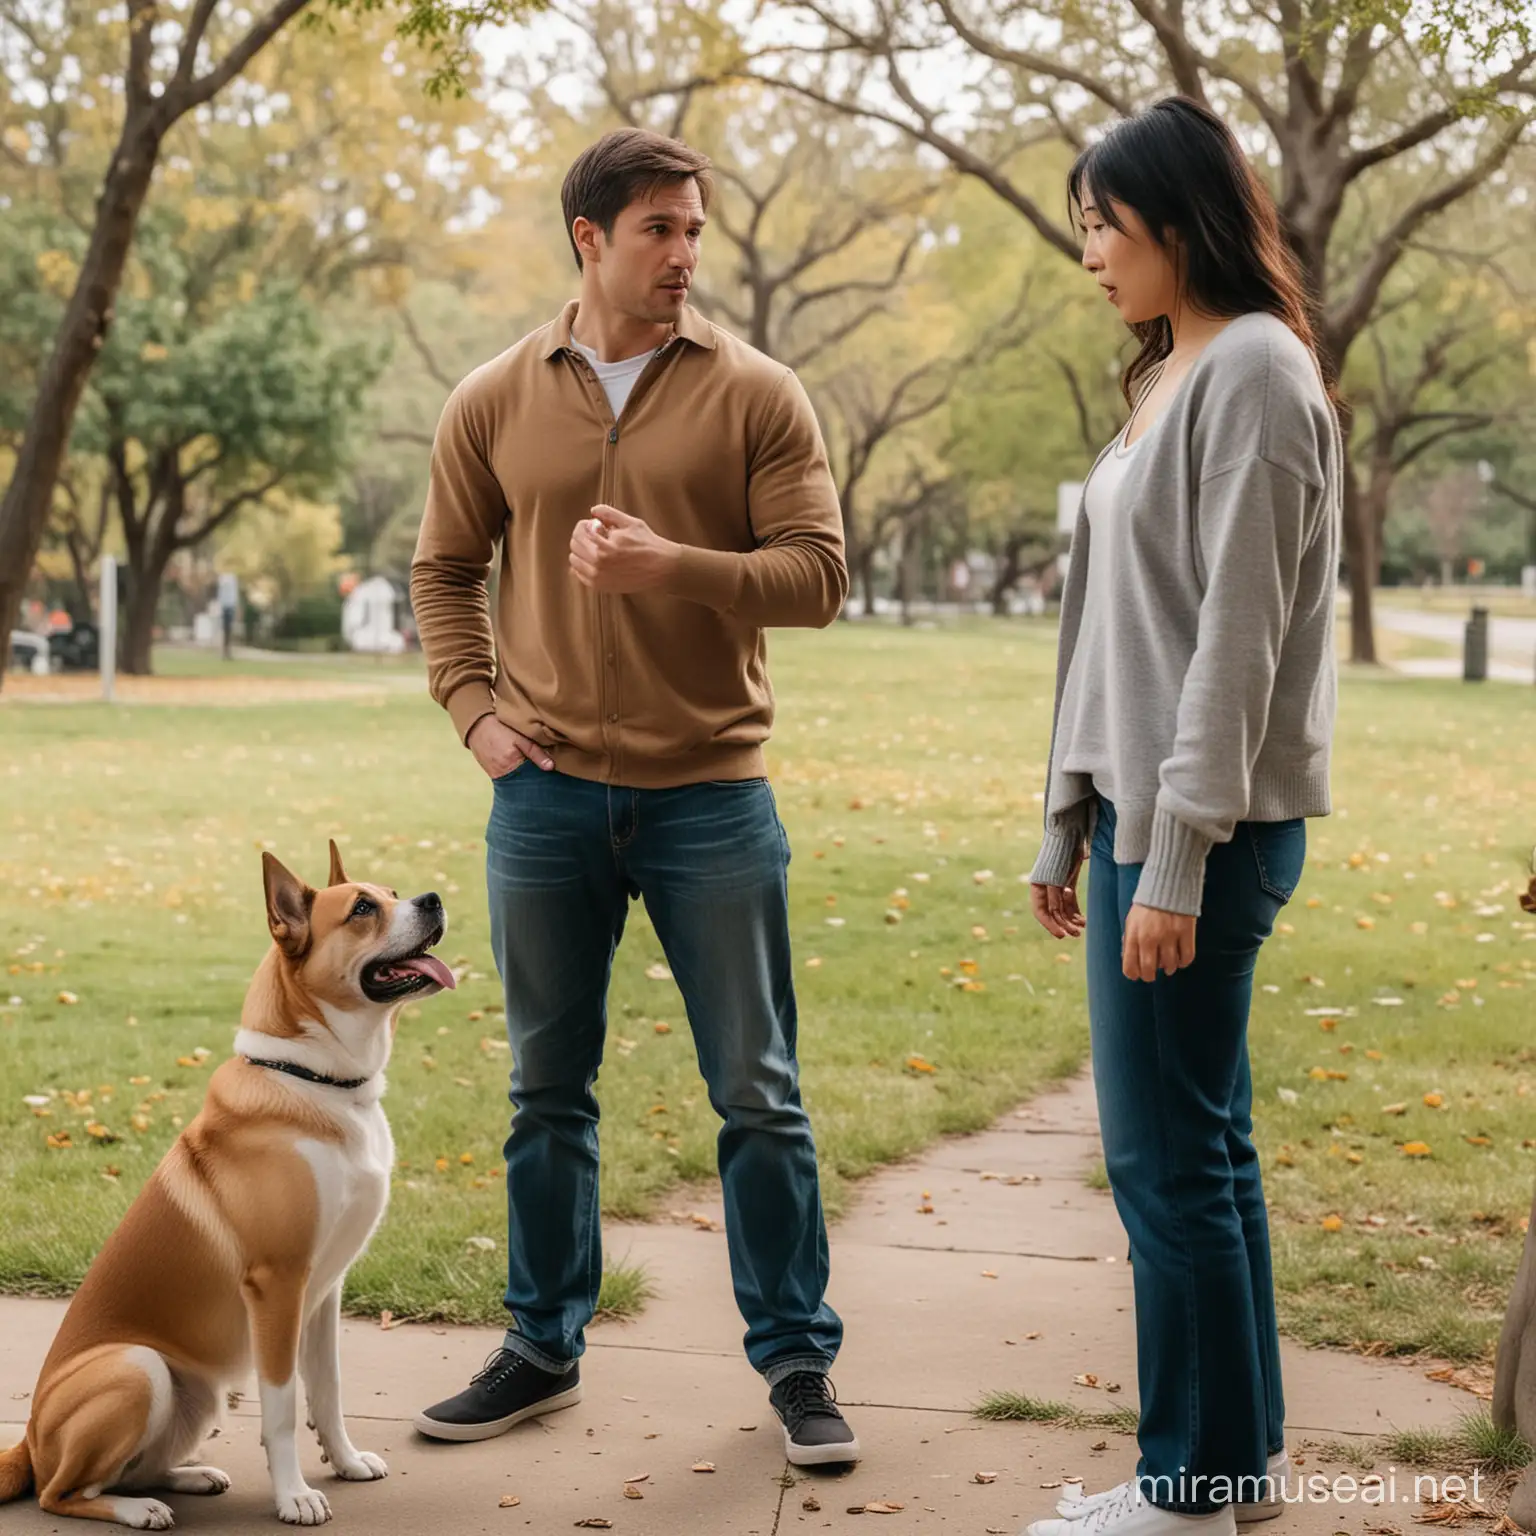 Tense Argument Between Young Couple with Concerned Dog Nearby